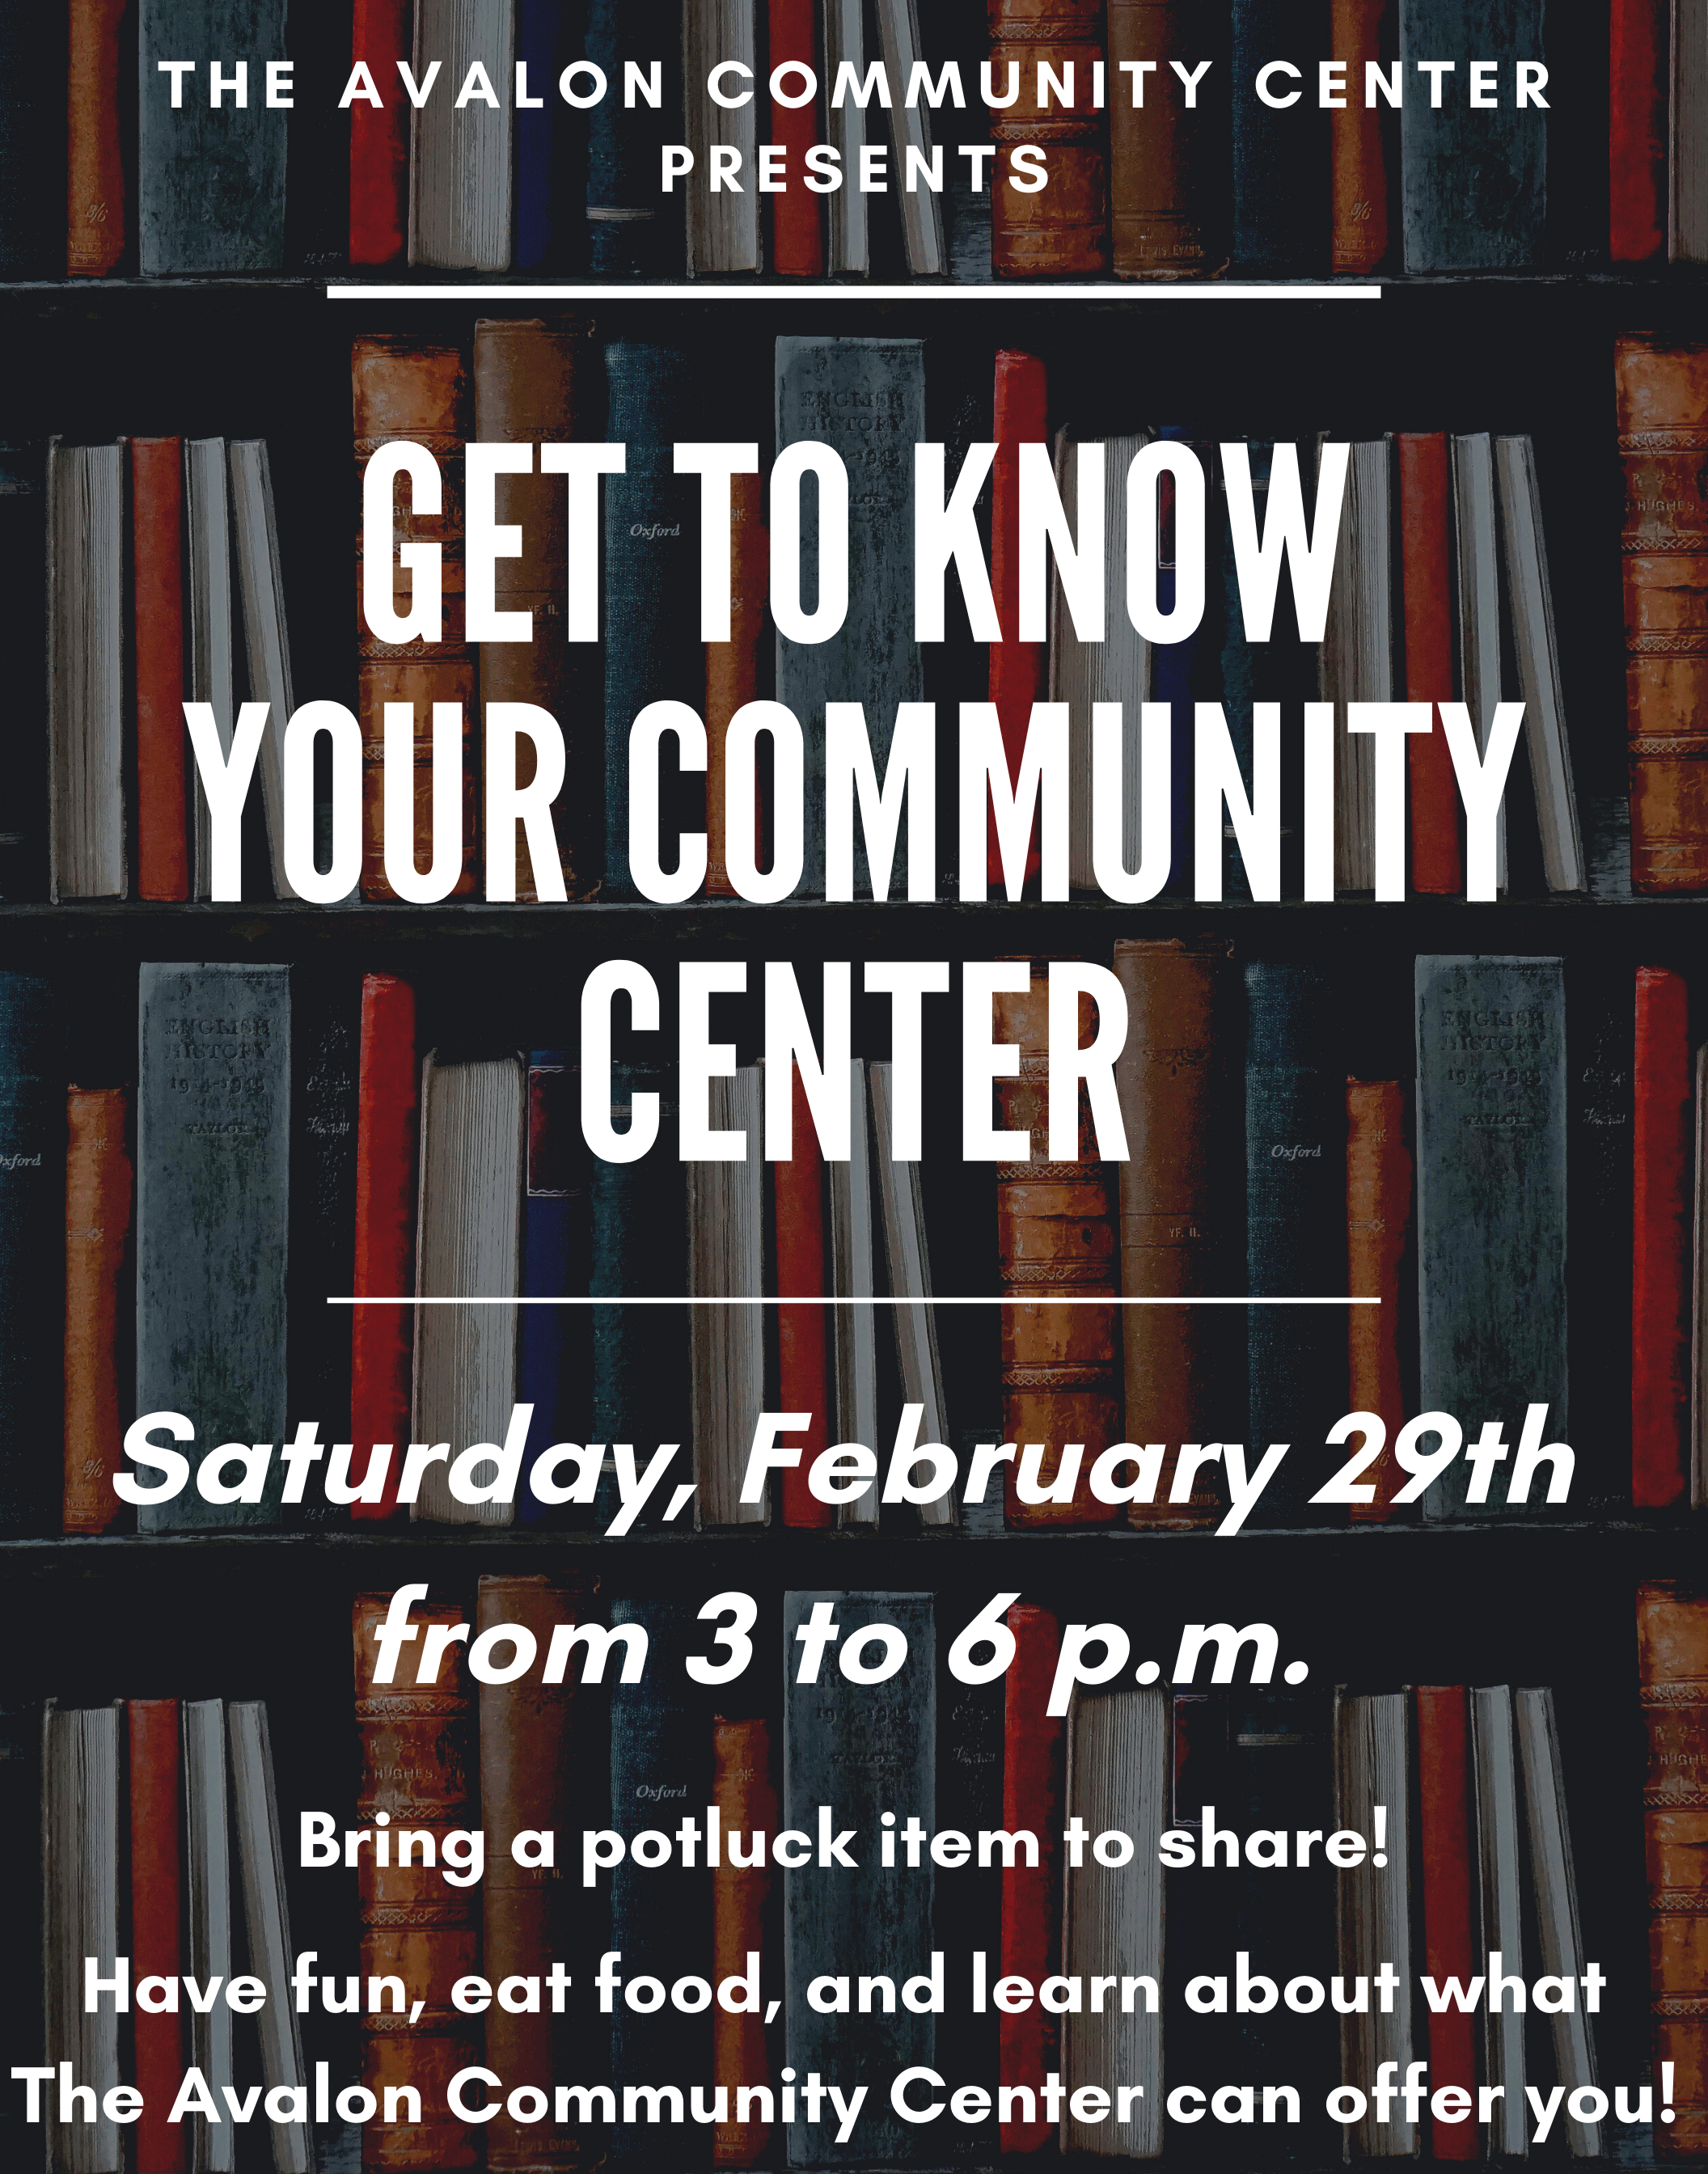 The Avalon Community Center Presents Get to Know Your Community Center Saturday, February 29th from 3 to 6 p.m. Bring a potluck item to share! Have fun, eat food, and learn about what The Avalon Community Center can offer you! 